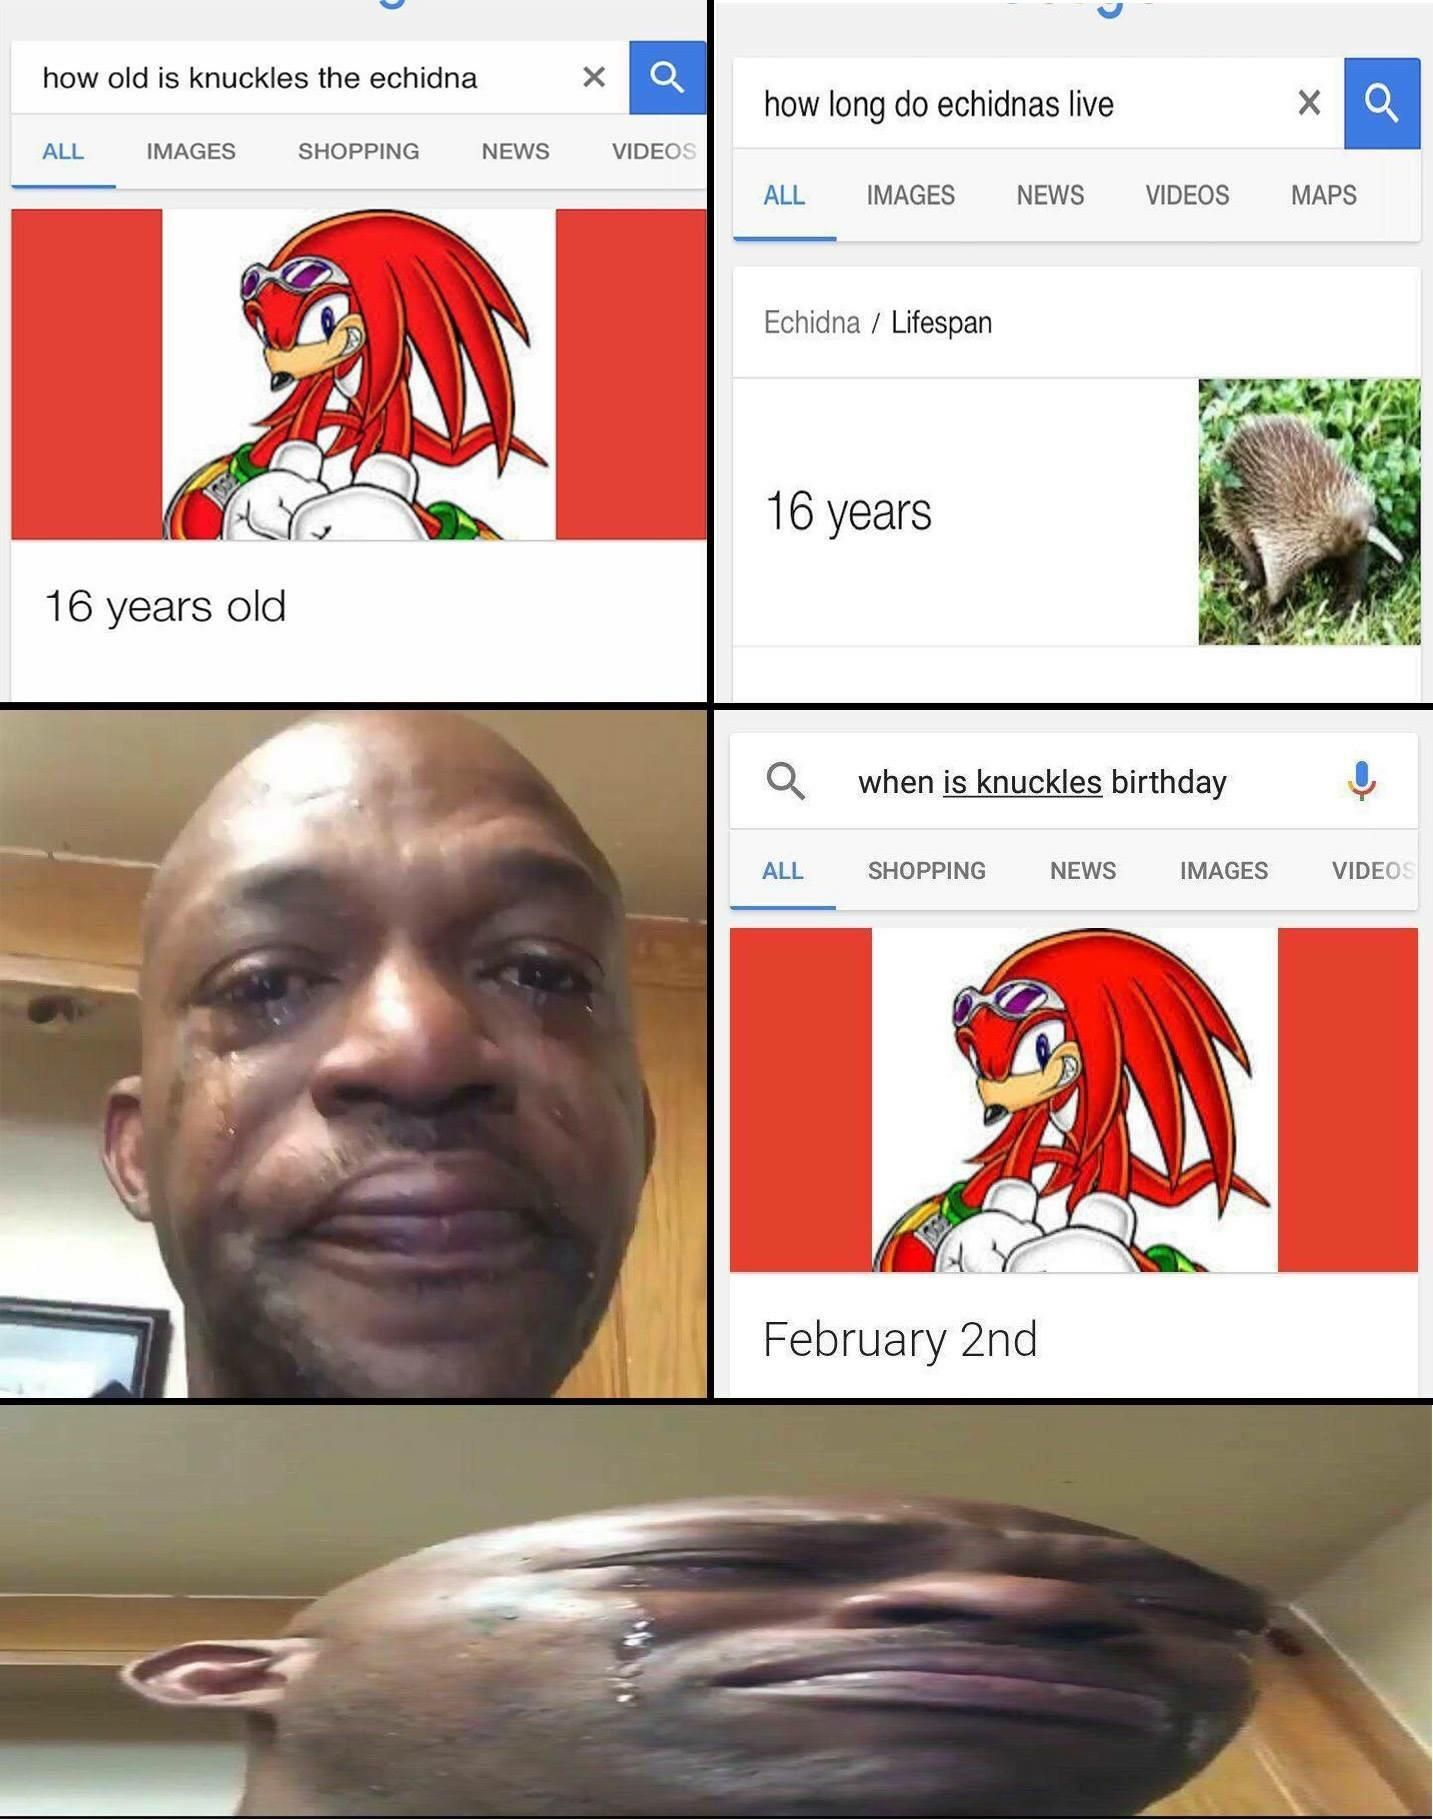 Rip knuckles 2/2/17.